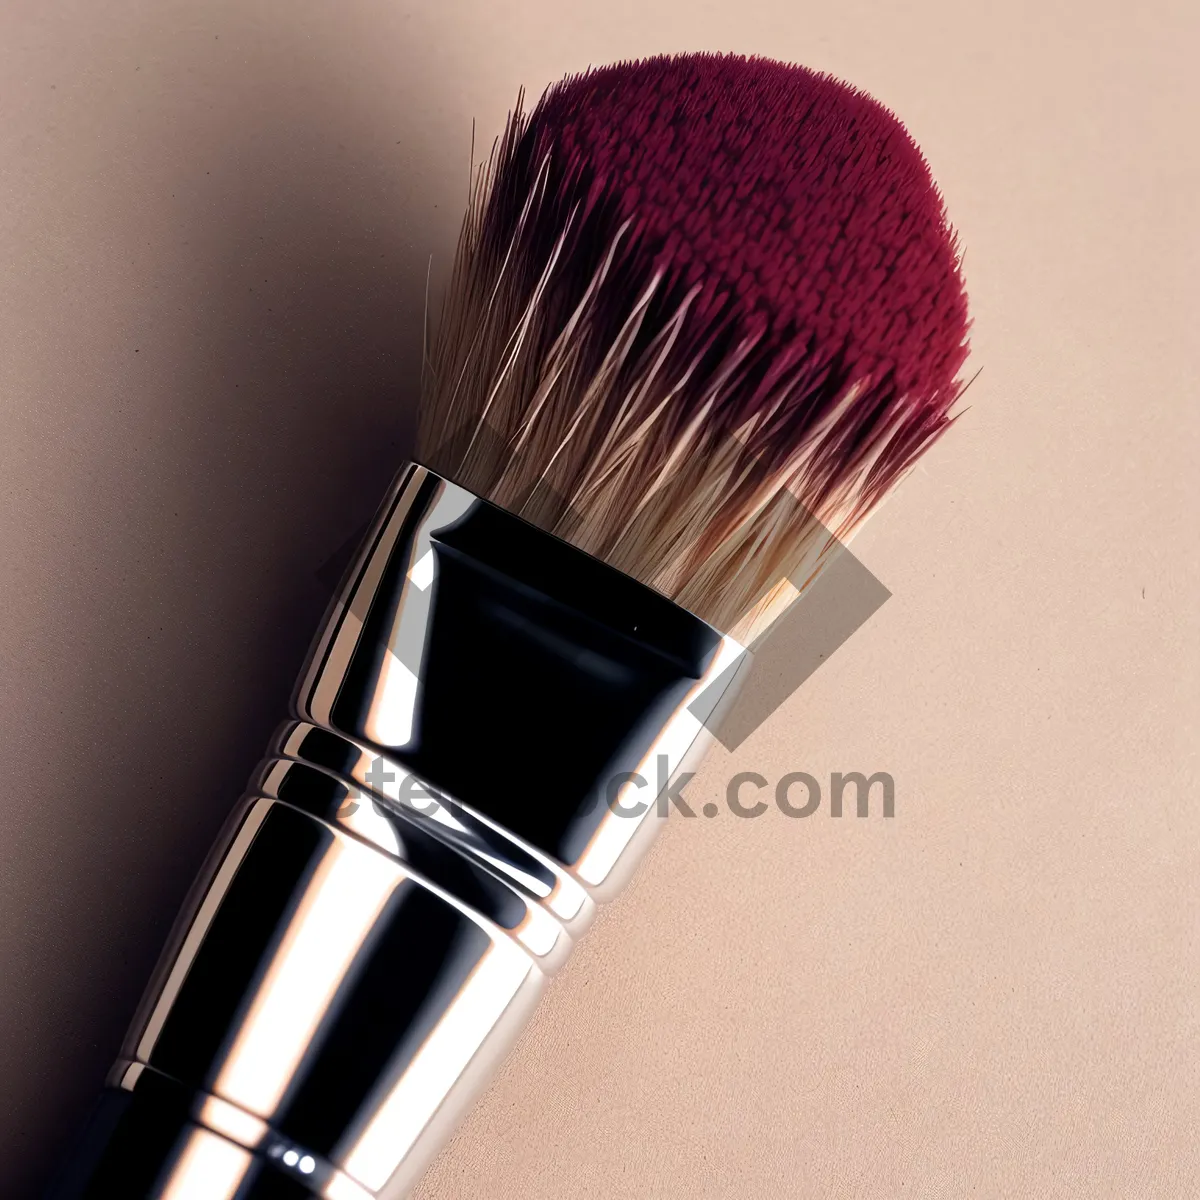 Picture of Colorful Makeup Brushes for Artistic Creations